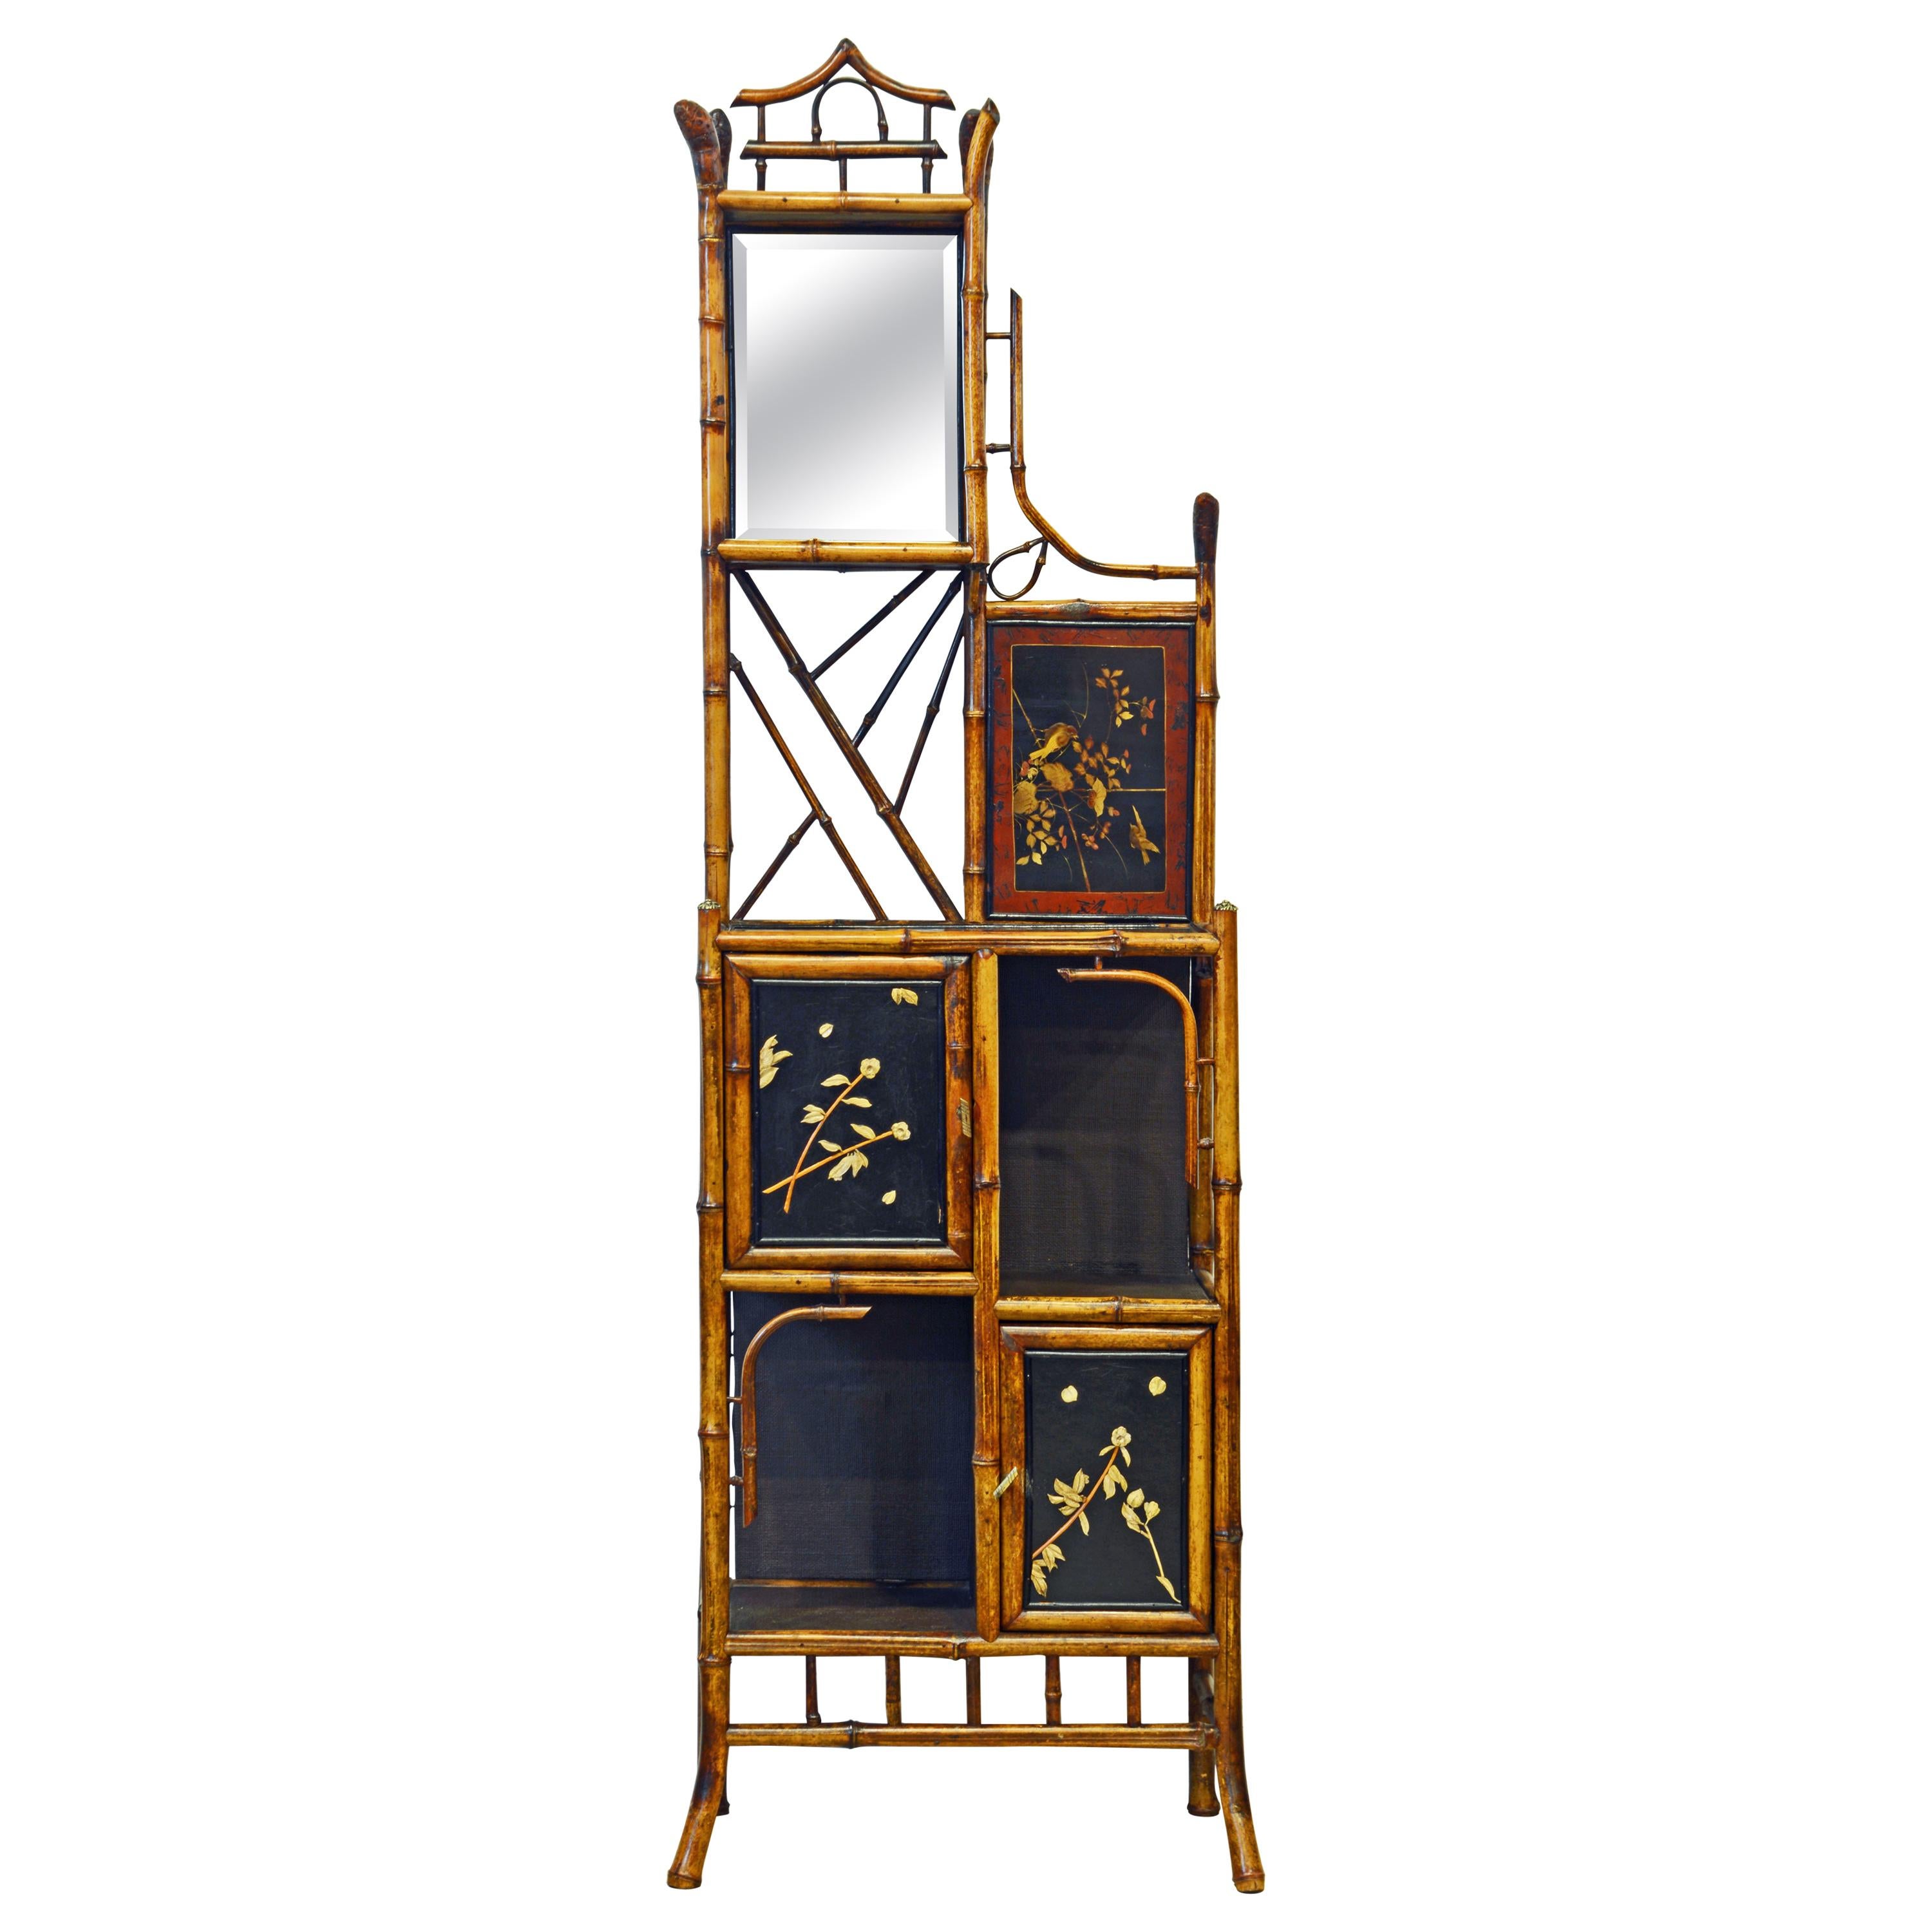 English Aesthetic Movement Bamboo and Lacquer Cabinet Étagère, Late 19th Century